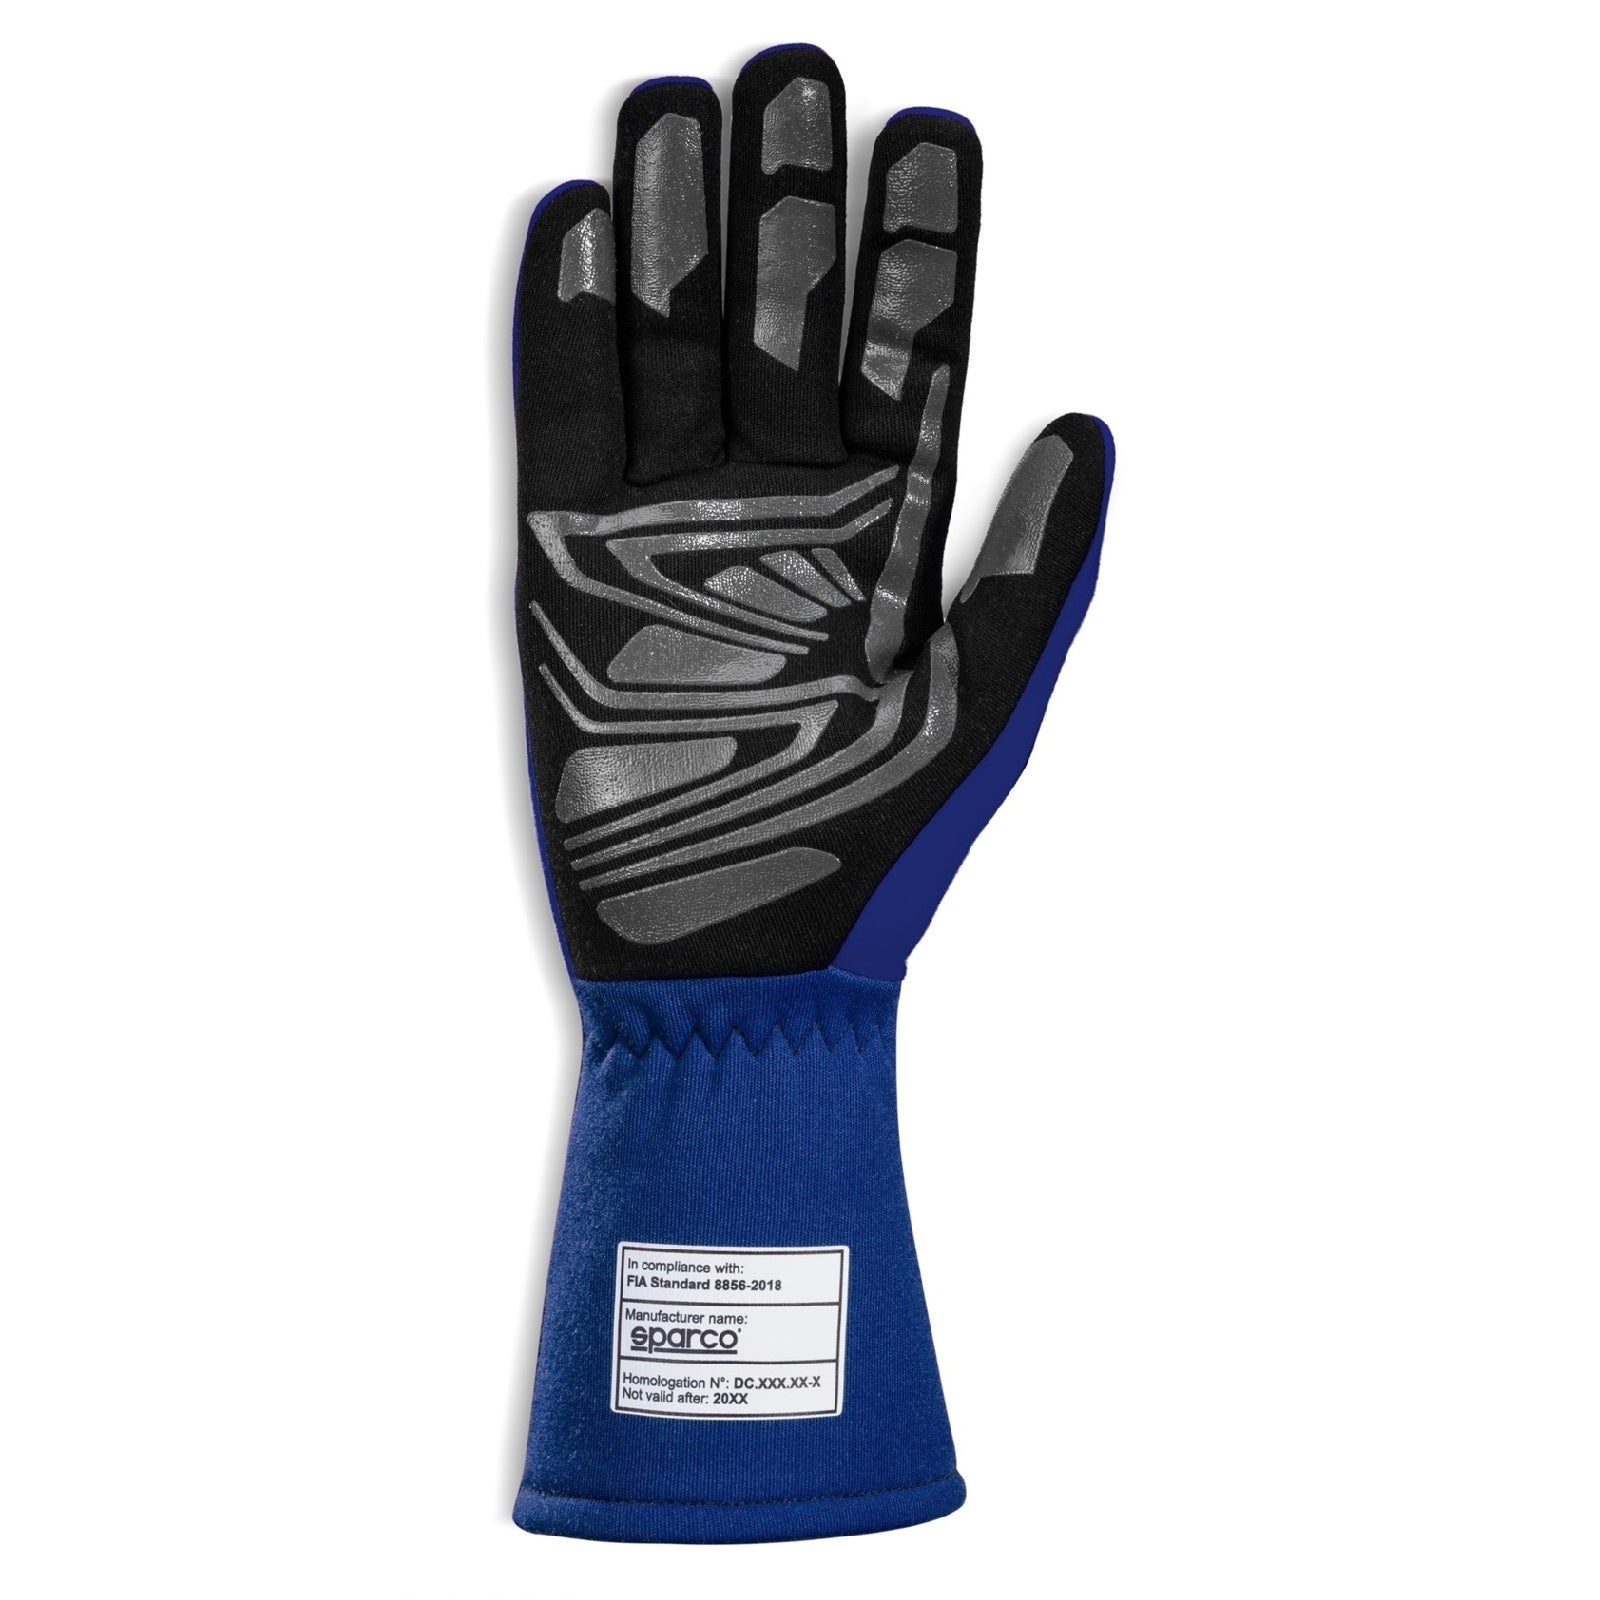 SPARCO LAND+ GLOVE AUTO RACING AUTHORIZED USA DEALER FREE SHIPPING